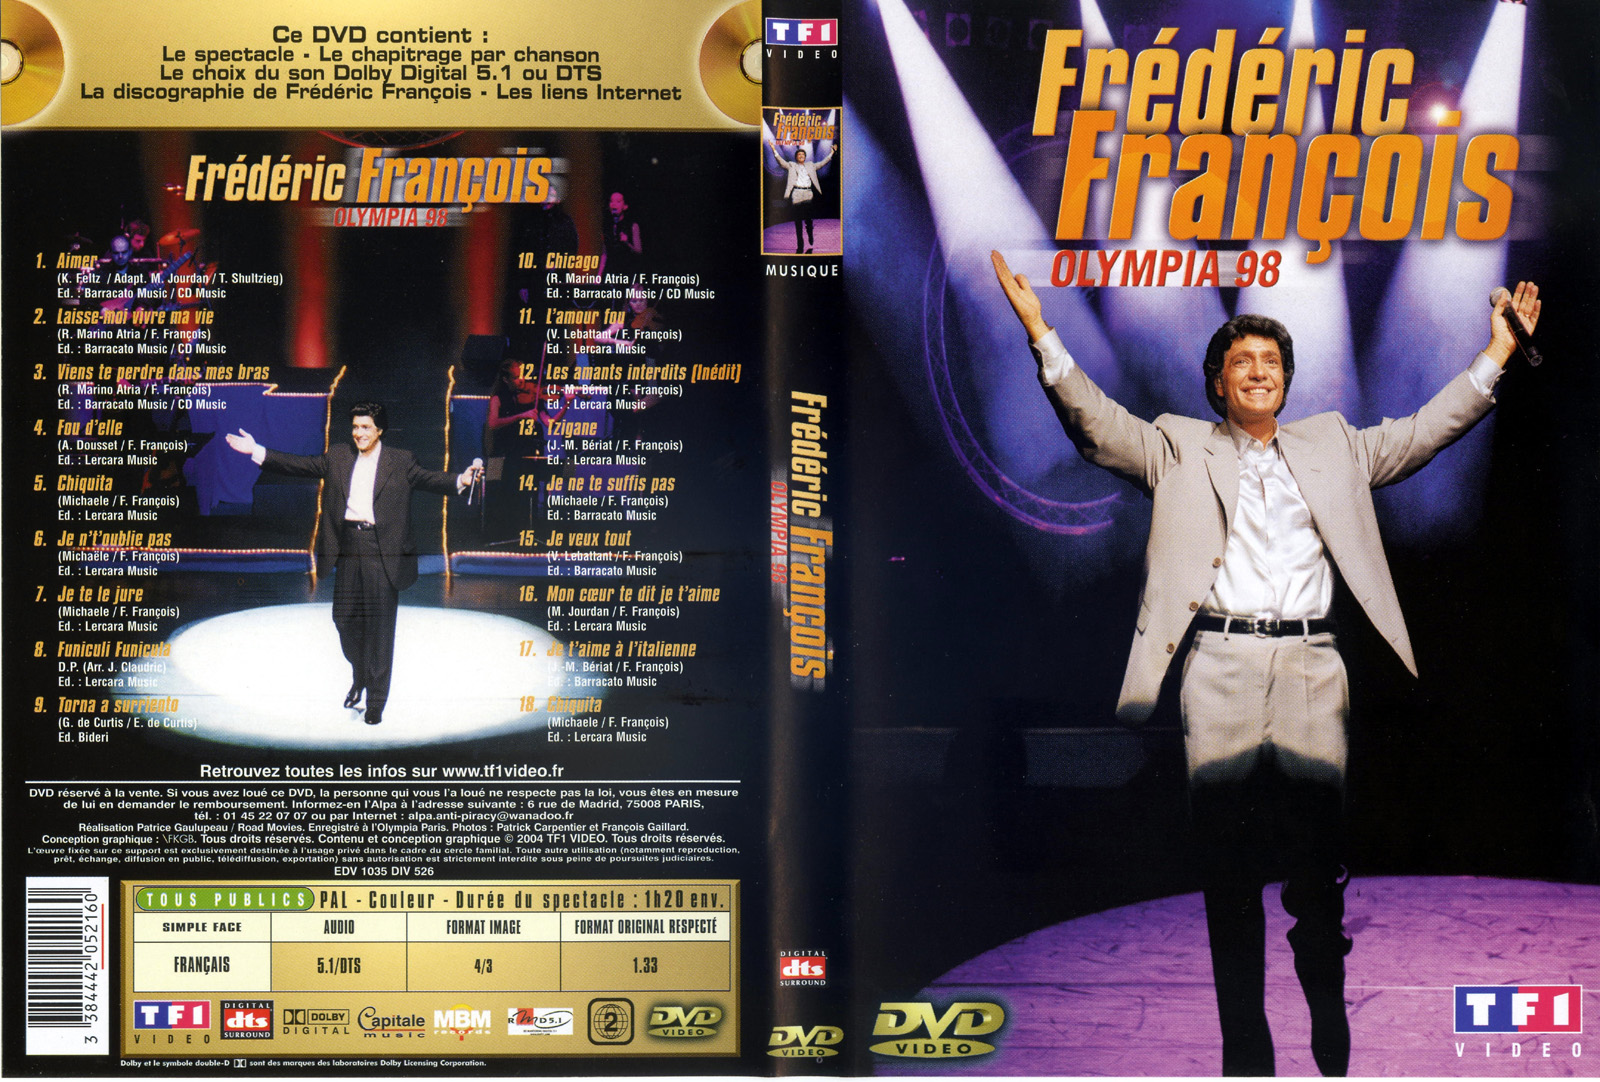 Jaquette DVD Frdric Francois - Olympia 1998